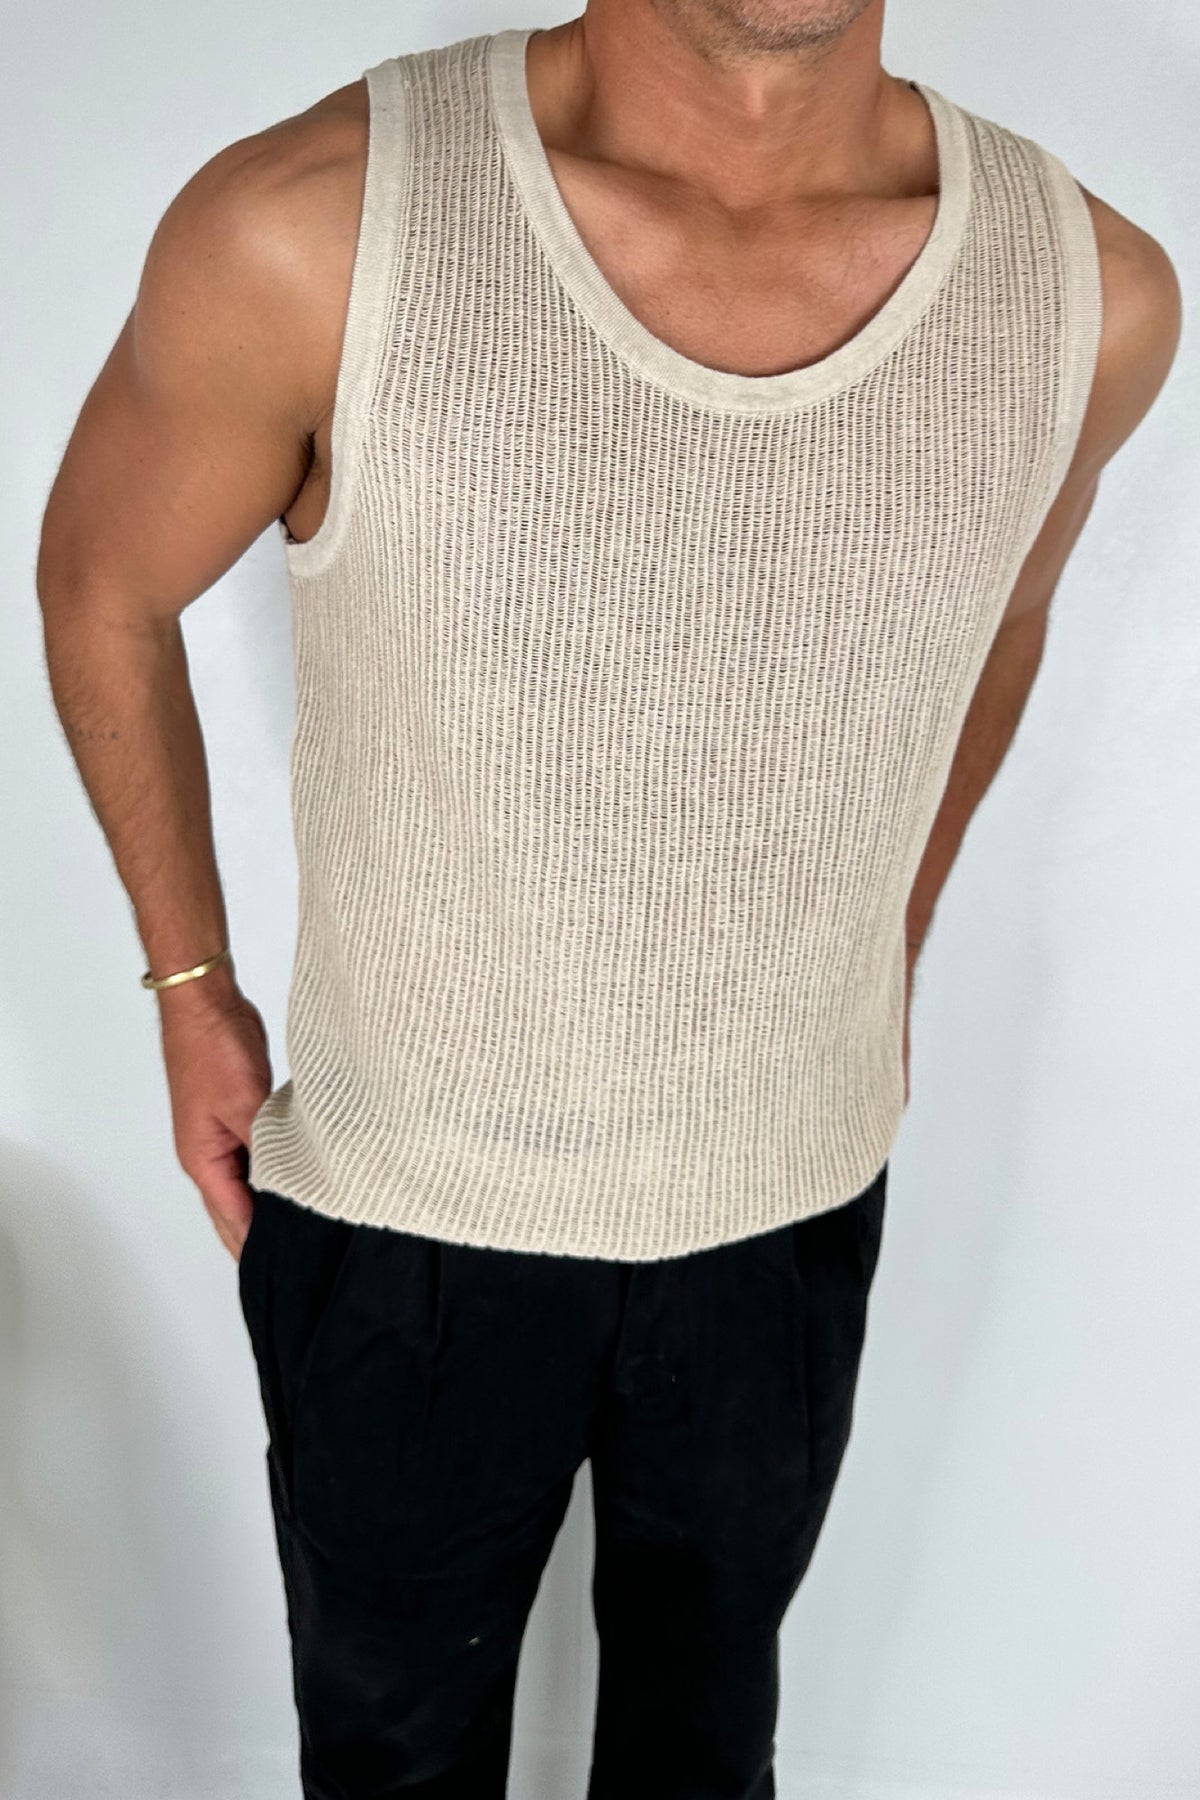 MEN'S TEXTURED HAND KNIT TANK TOP by NOSTRA SANTISSIMA - Shop Untitled NYC